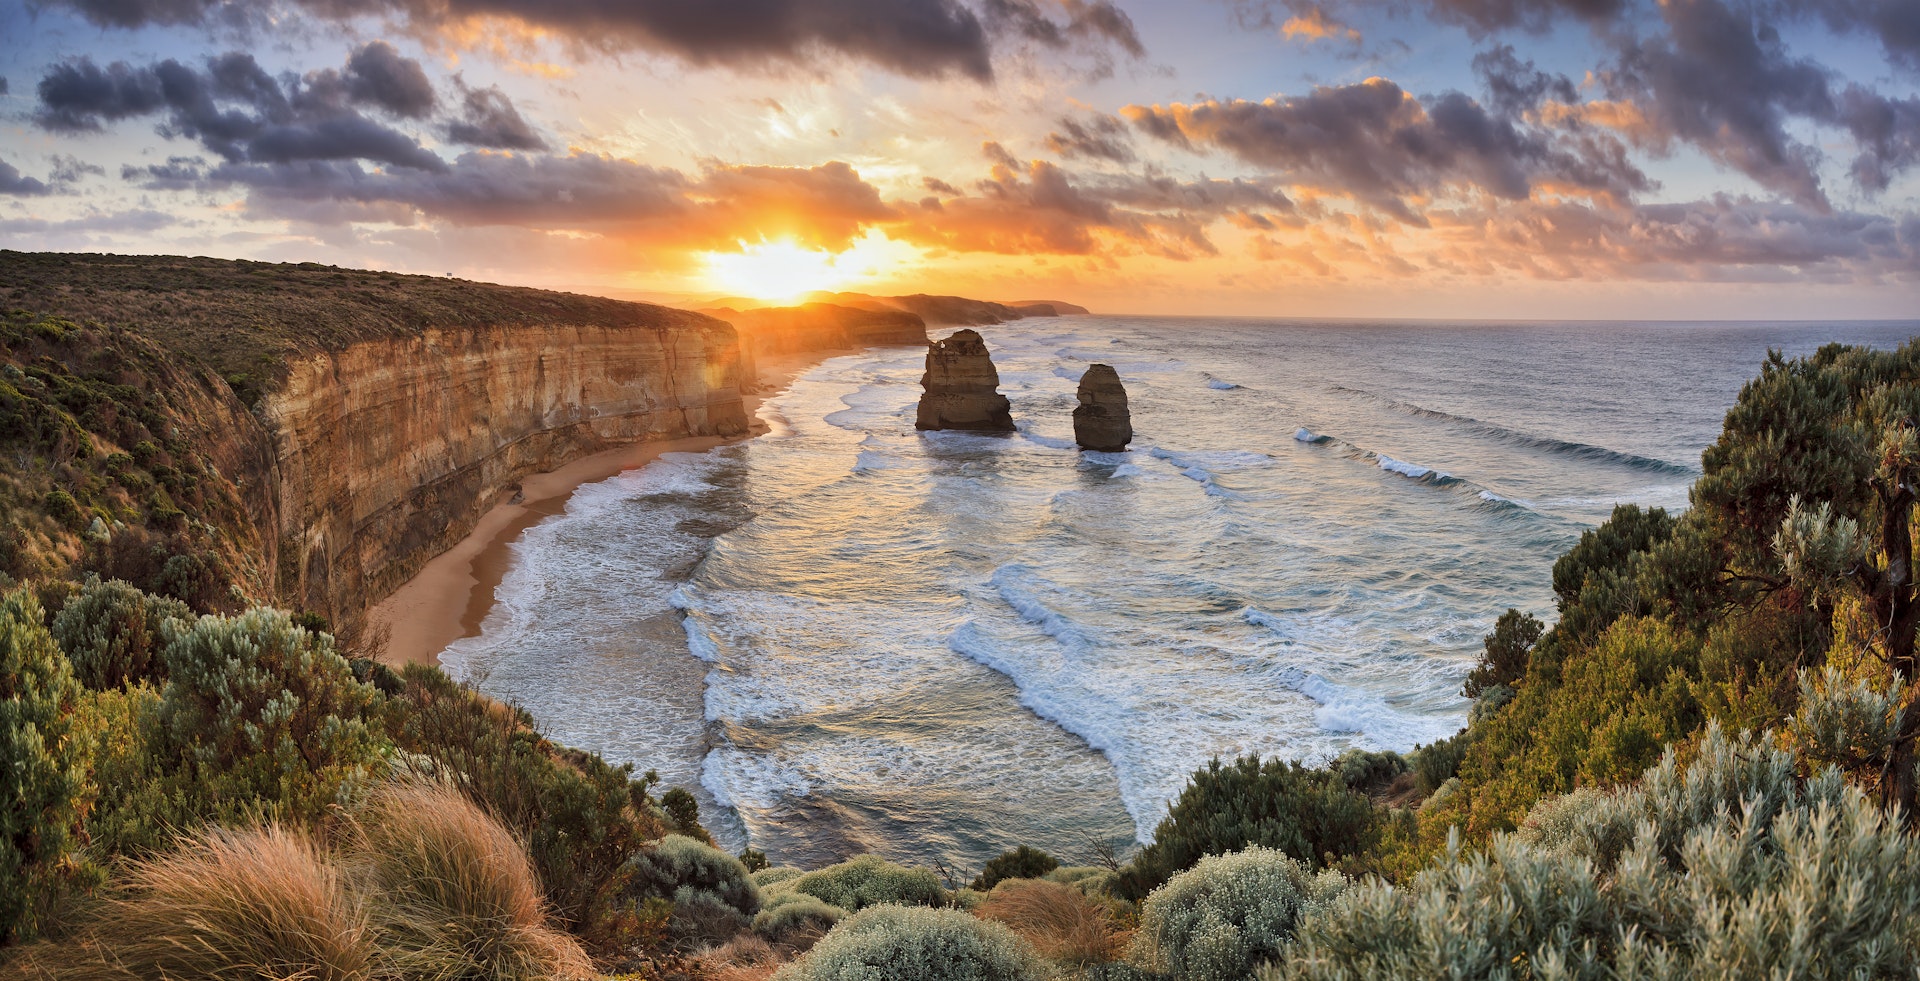 Two of Twelve Apostles rock formations in sea, Great Ocean Road at sunset